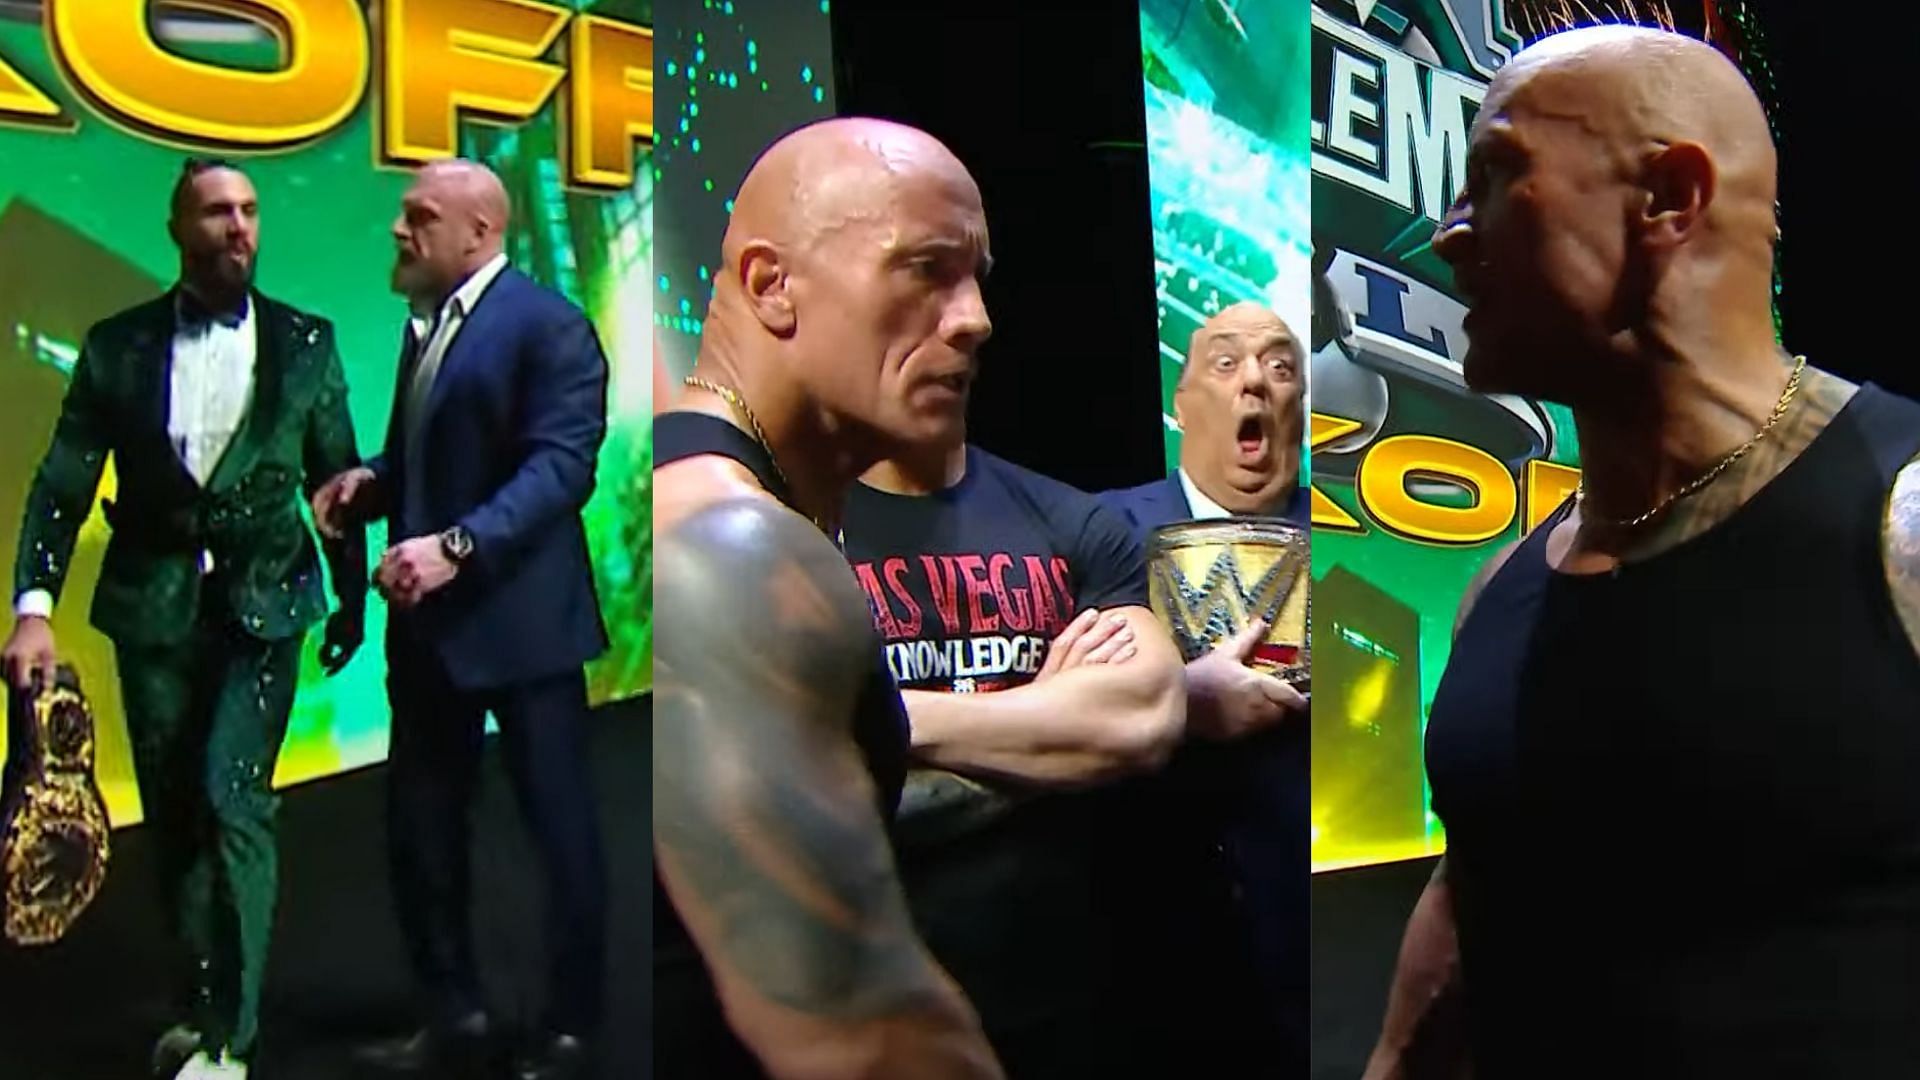 The Rock took things too far during the WrestleMania 40 Press Event